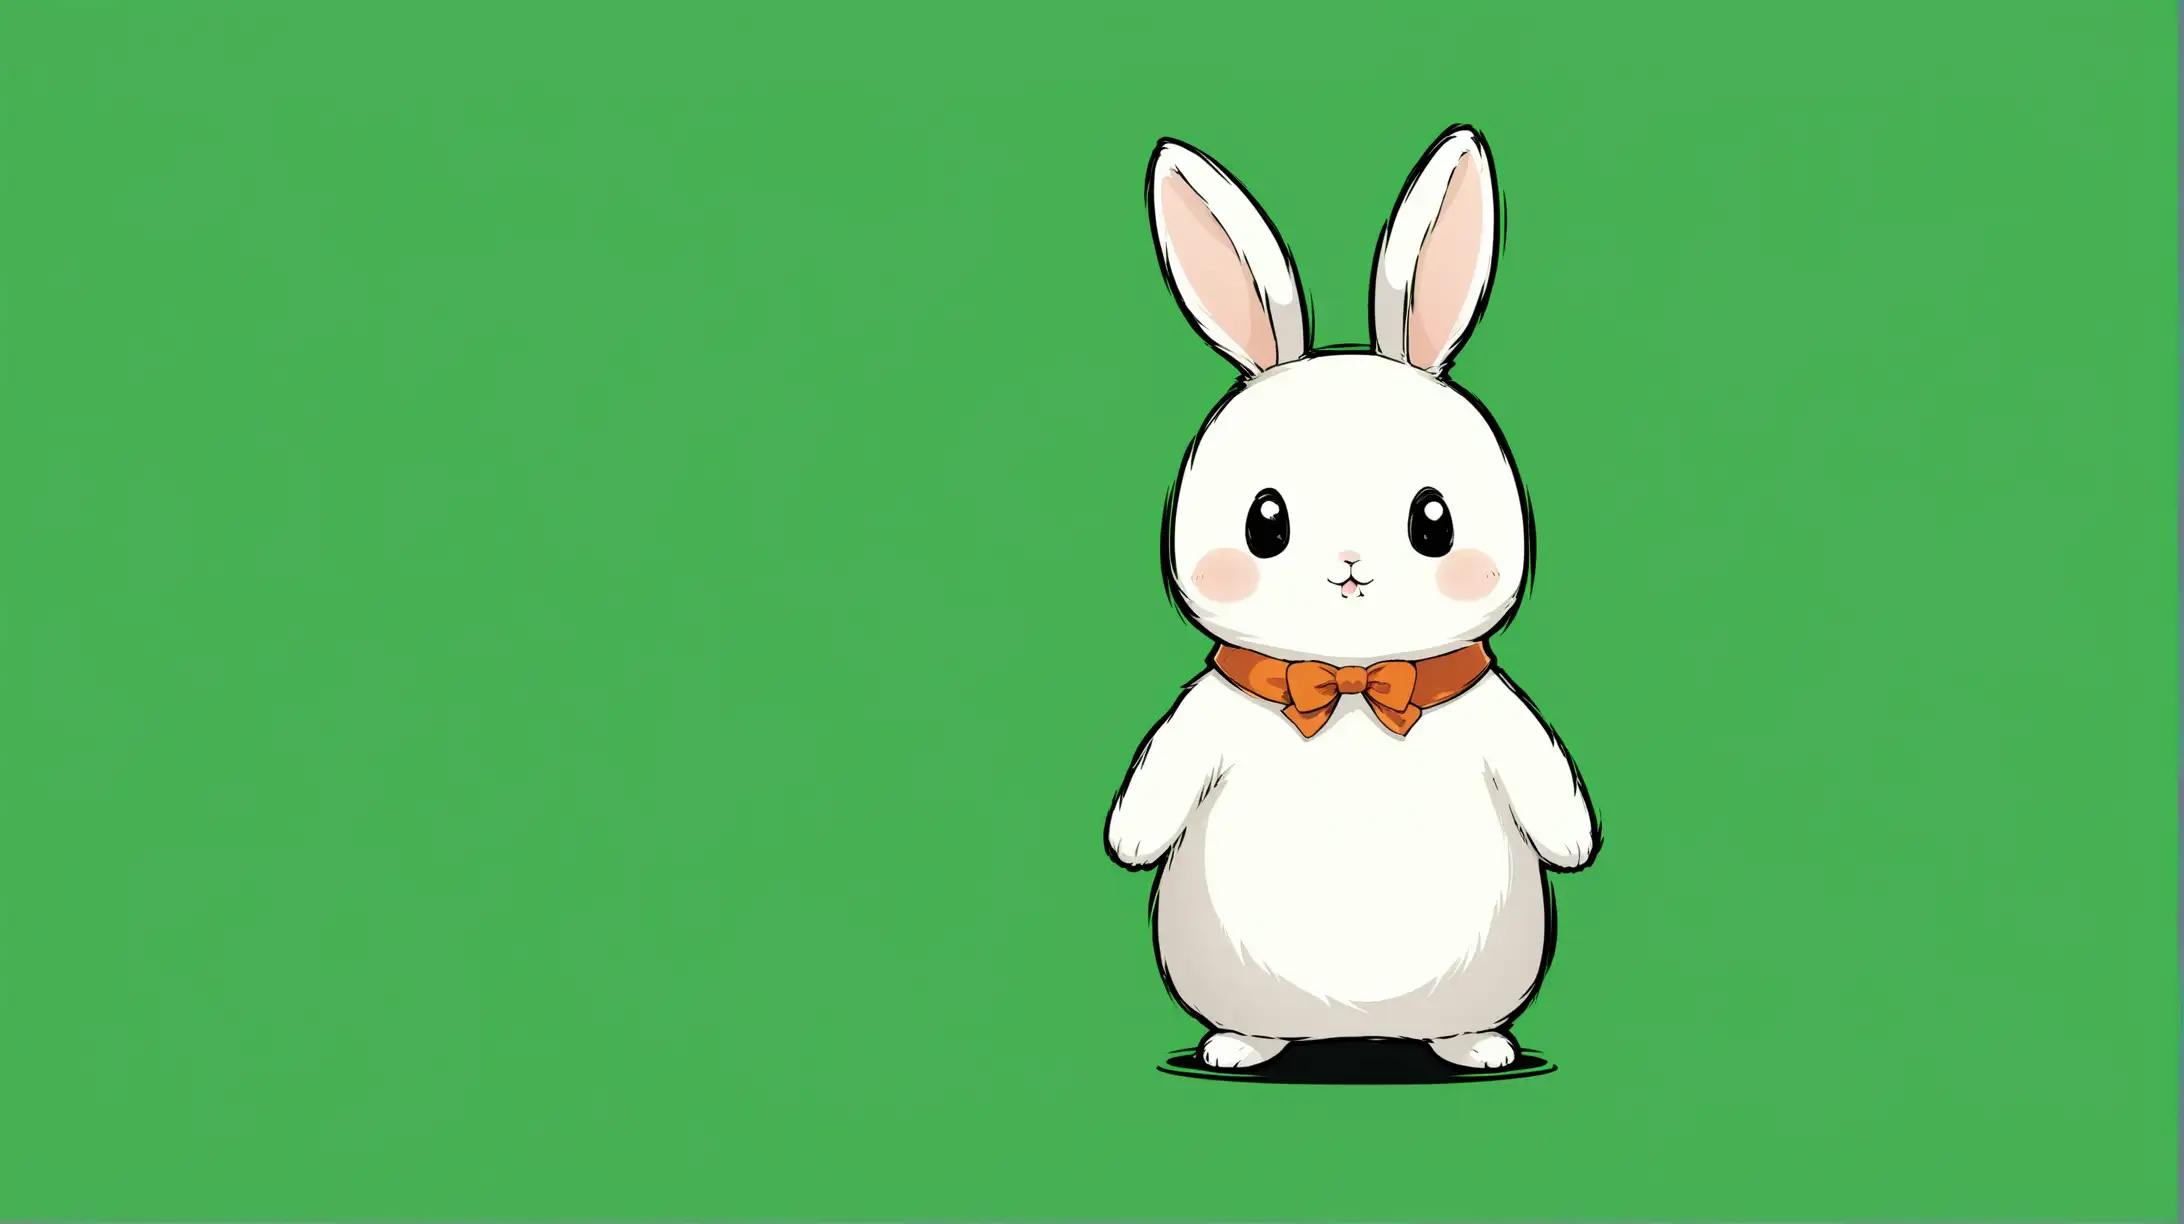 Adorable White Rabbit with Green Screen Background